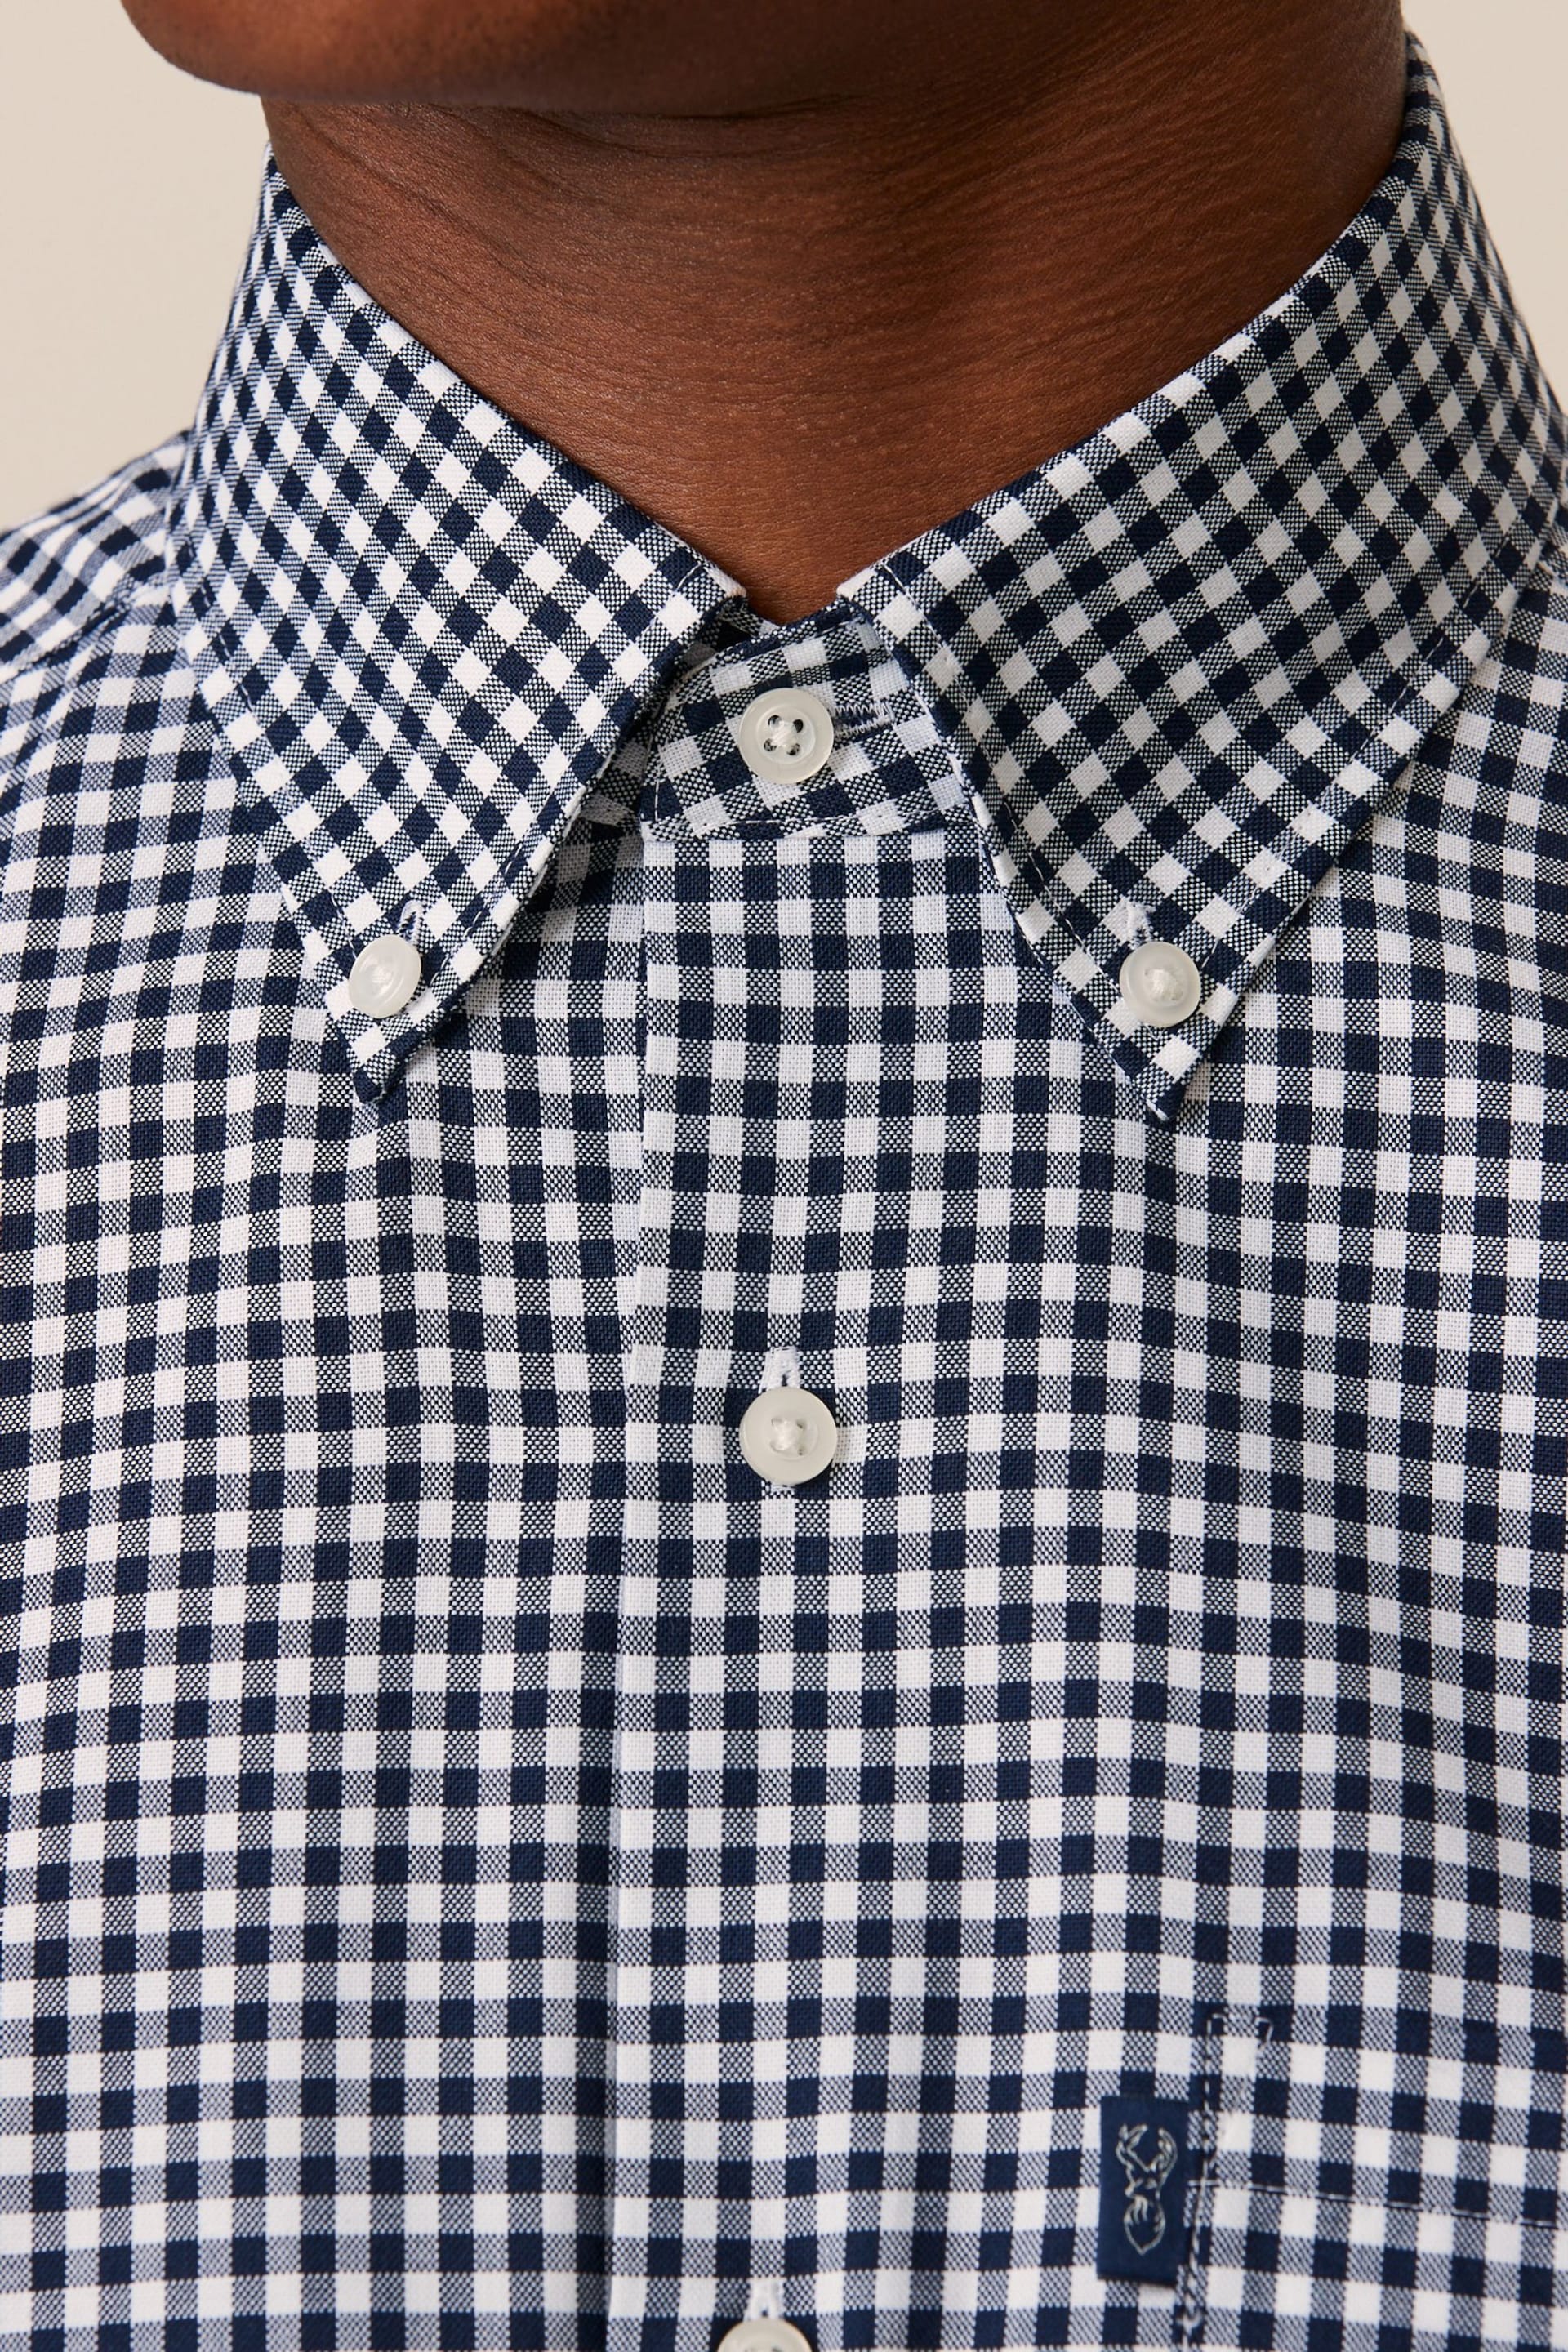 Navy Blue Gingham Easy Iron Button Down Oxford Shirt - Image 4 of 7